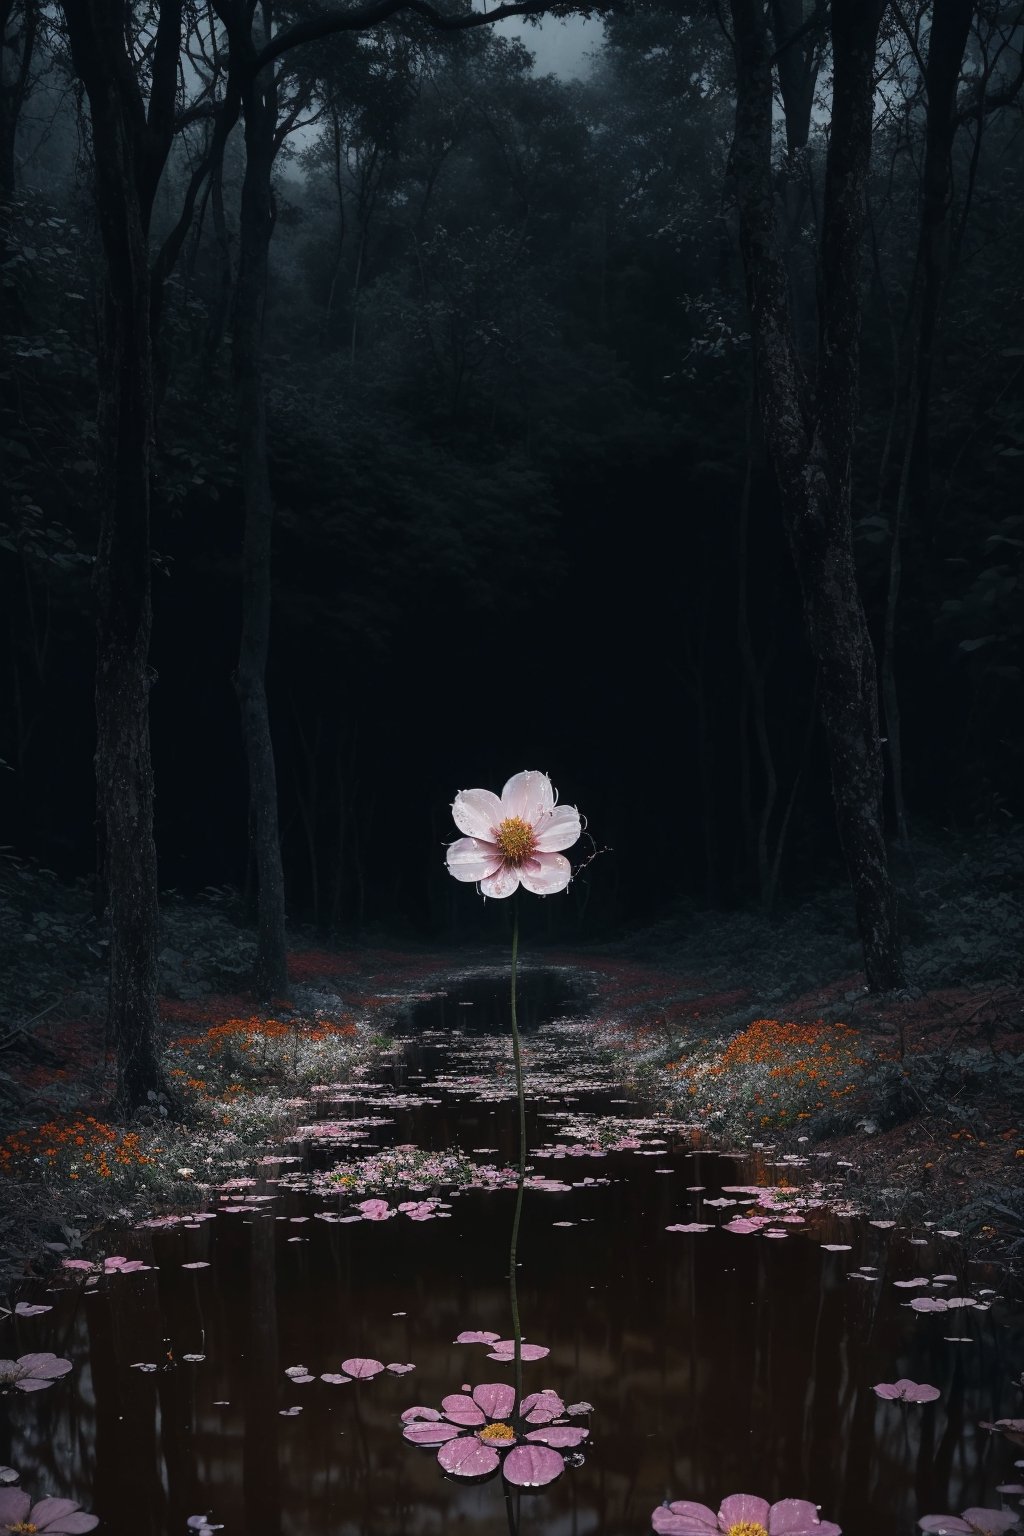 (masterpiece, best quality, very aesthetic, ultra detailed), intricate details, (no human. flower at Forest. Abandoned crunch), (rainy day. Cloudy. Wet ground. Water reflection. Gloomy. Ambient. Horror. Creepy. Dark), aesthetic